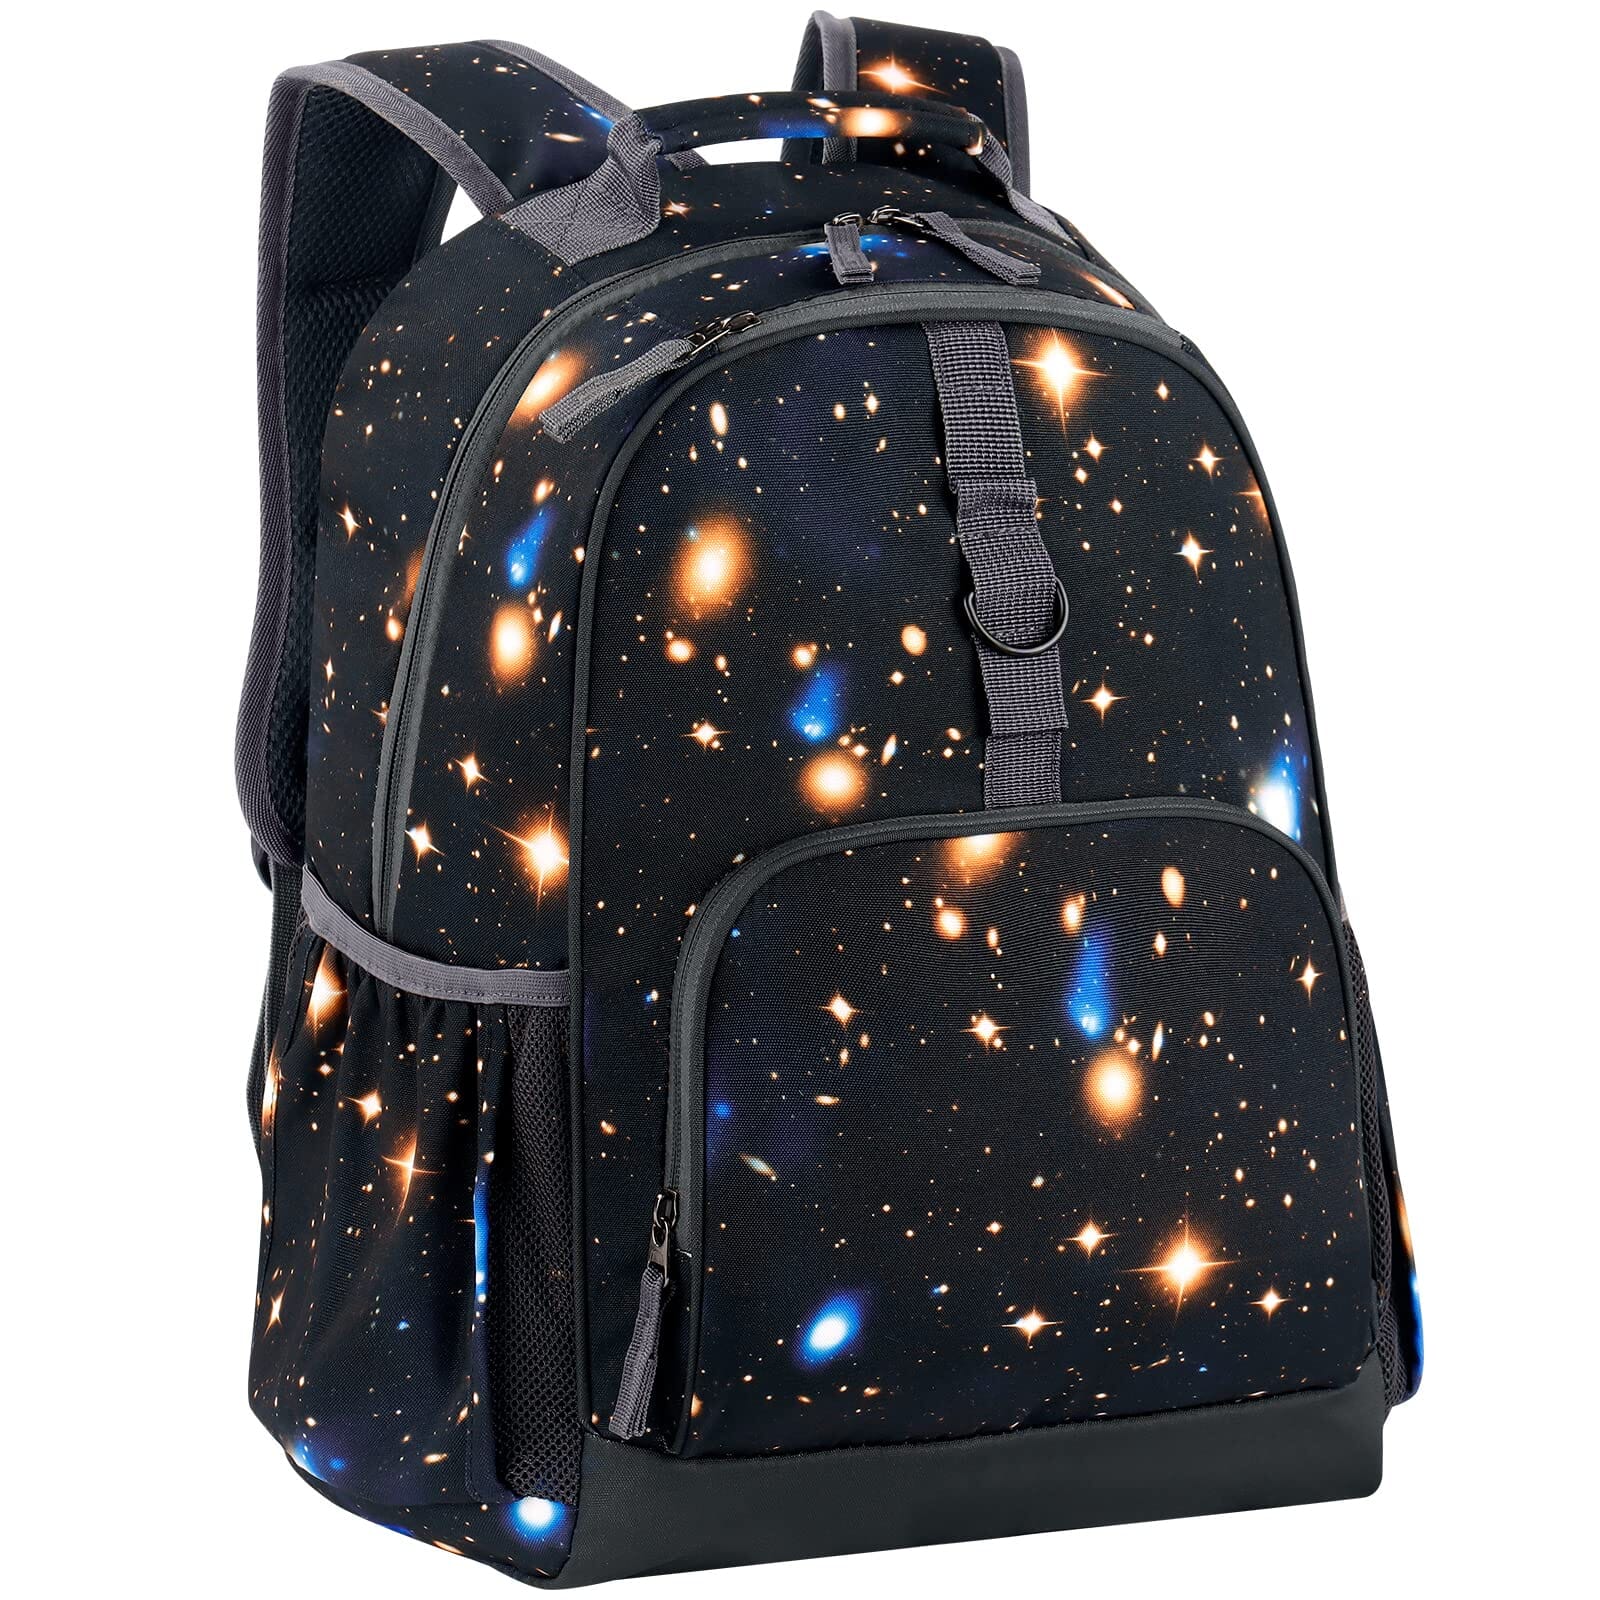 Choco Mocha Galaxy Backpack for Boys Backpacks for Elementary School Backpack for Kids Backpack Boys 17 inch Backpack for Boys Galaxy Bookbag with Chest Strap 5-7 6-8 School Bag 2nd 3rd Grade Black chocomochakids 